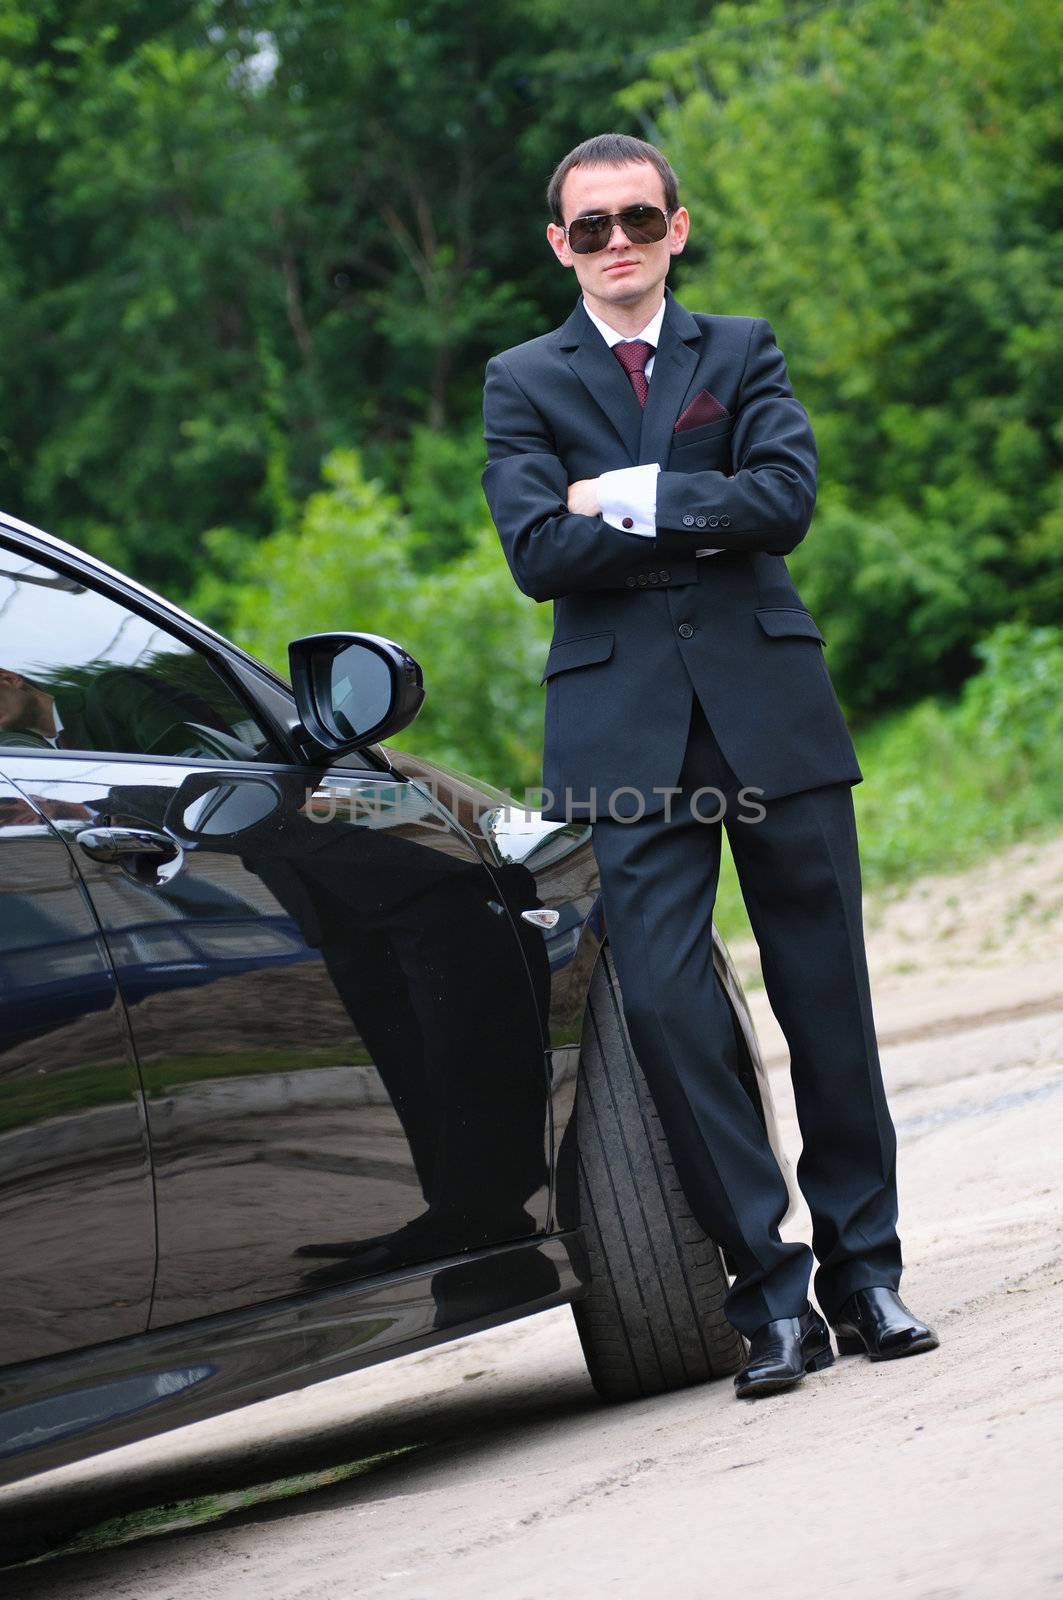 The young man with black glasses and suit stand near to expensive car